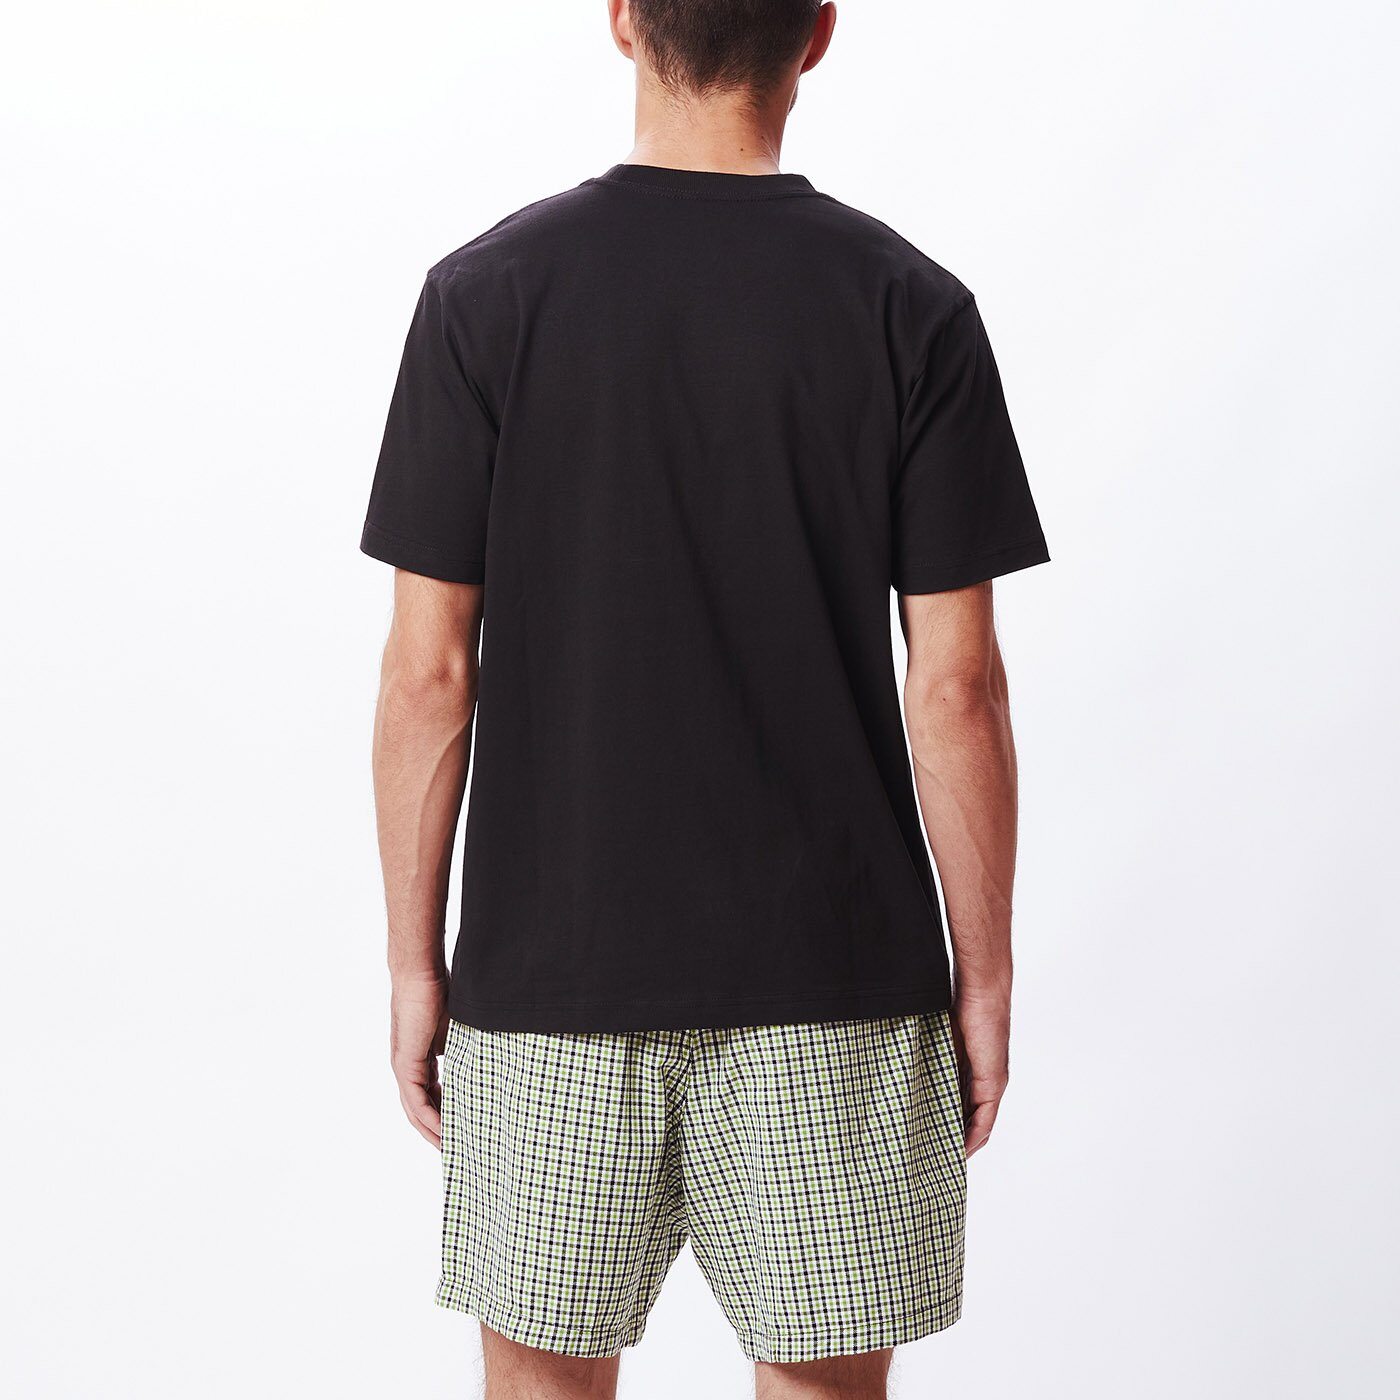 Obey - Point Pocket SS Tee - Black